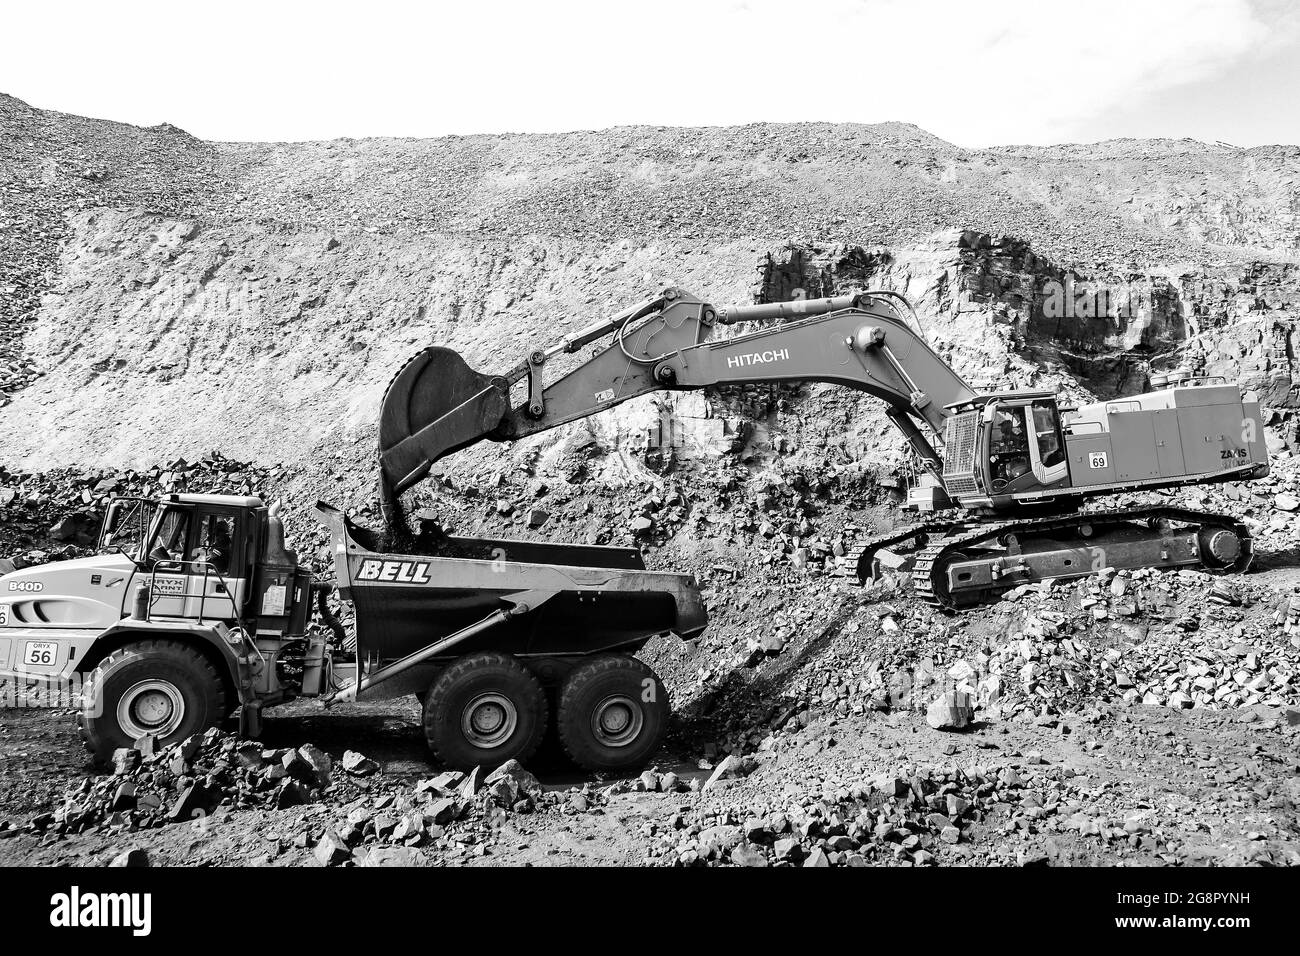 JOHANNESBURG, SOUTH AFRICA - Jan 06, 2021: A excavator working in the pit manganese mining site Stock Photo